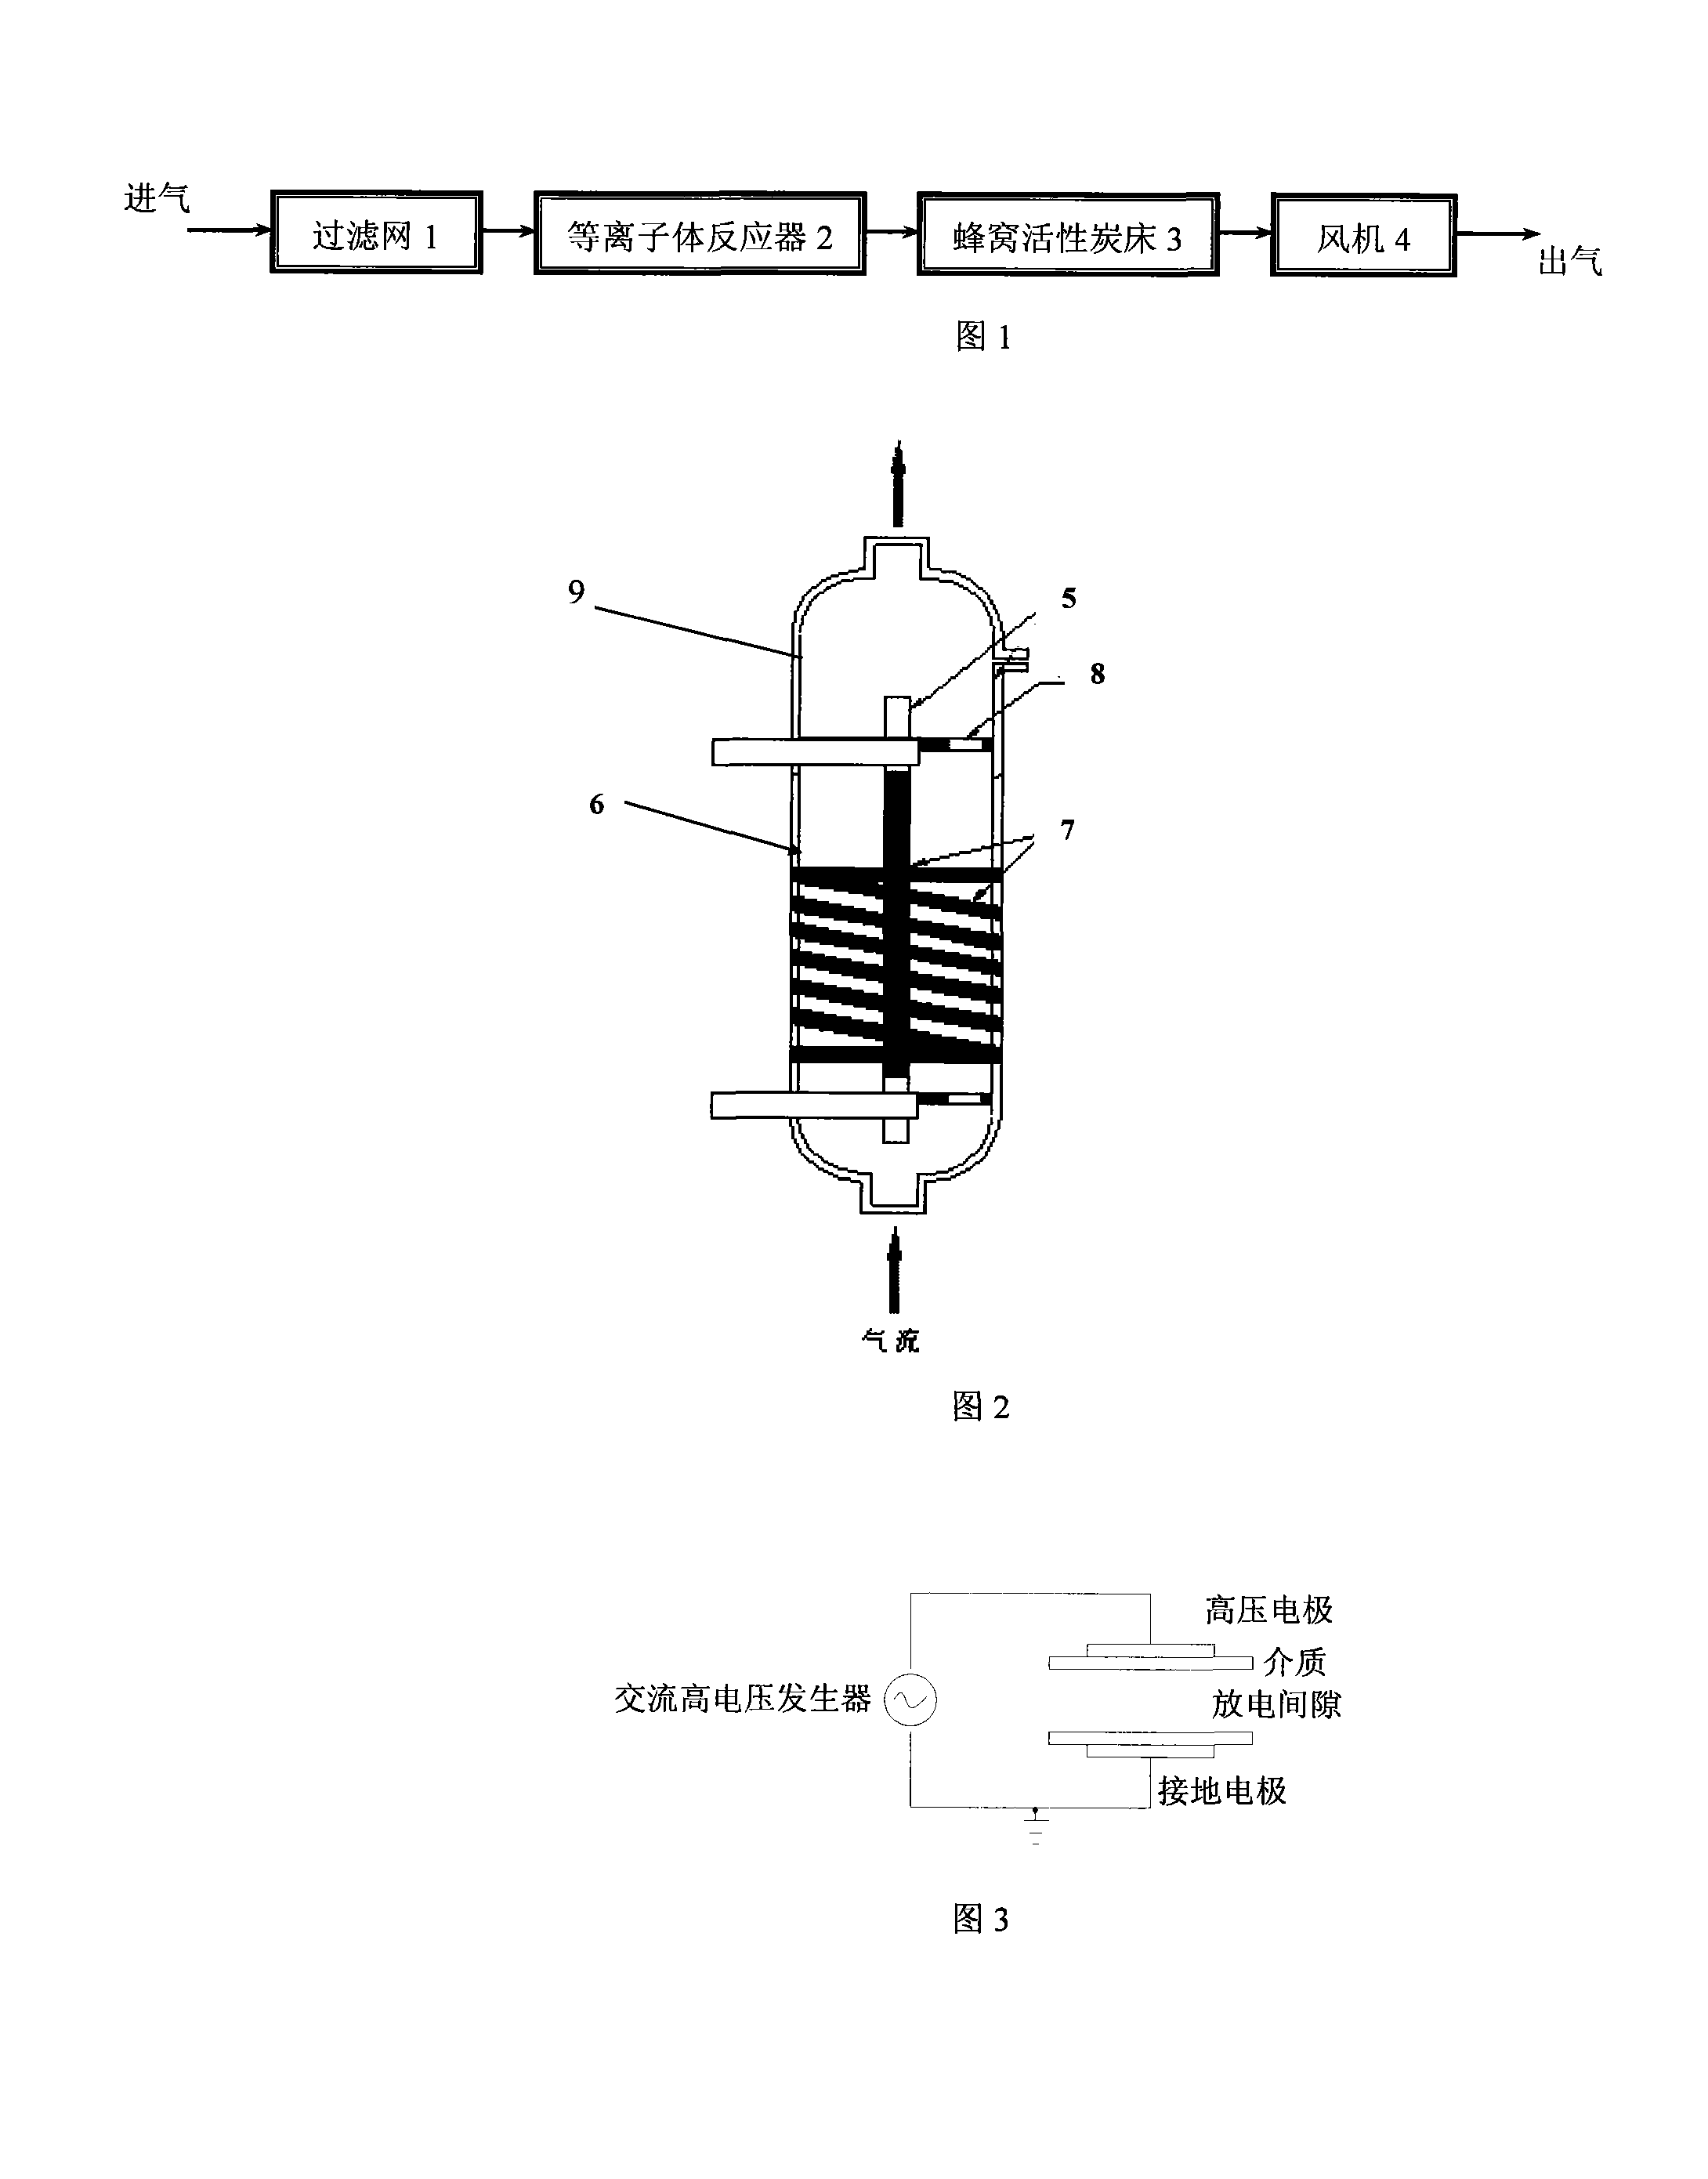 Device and method for processing municipal utilities foul gas